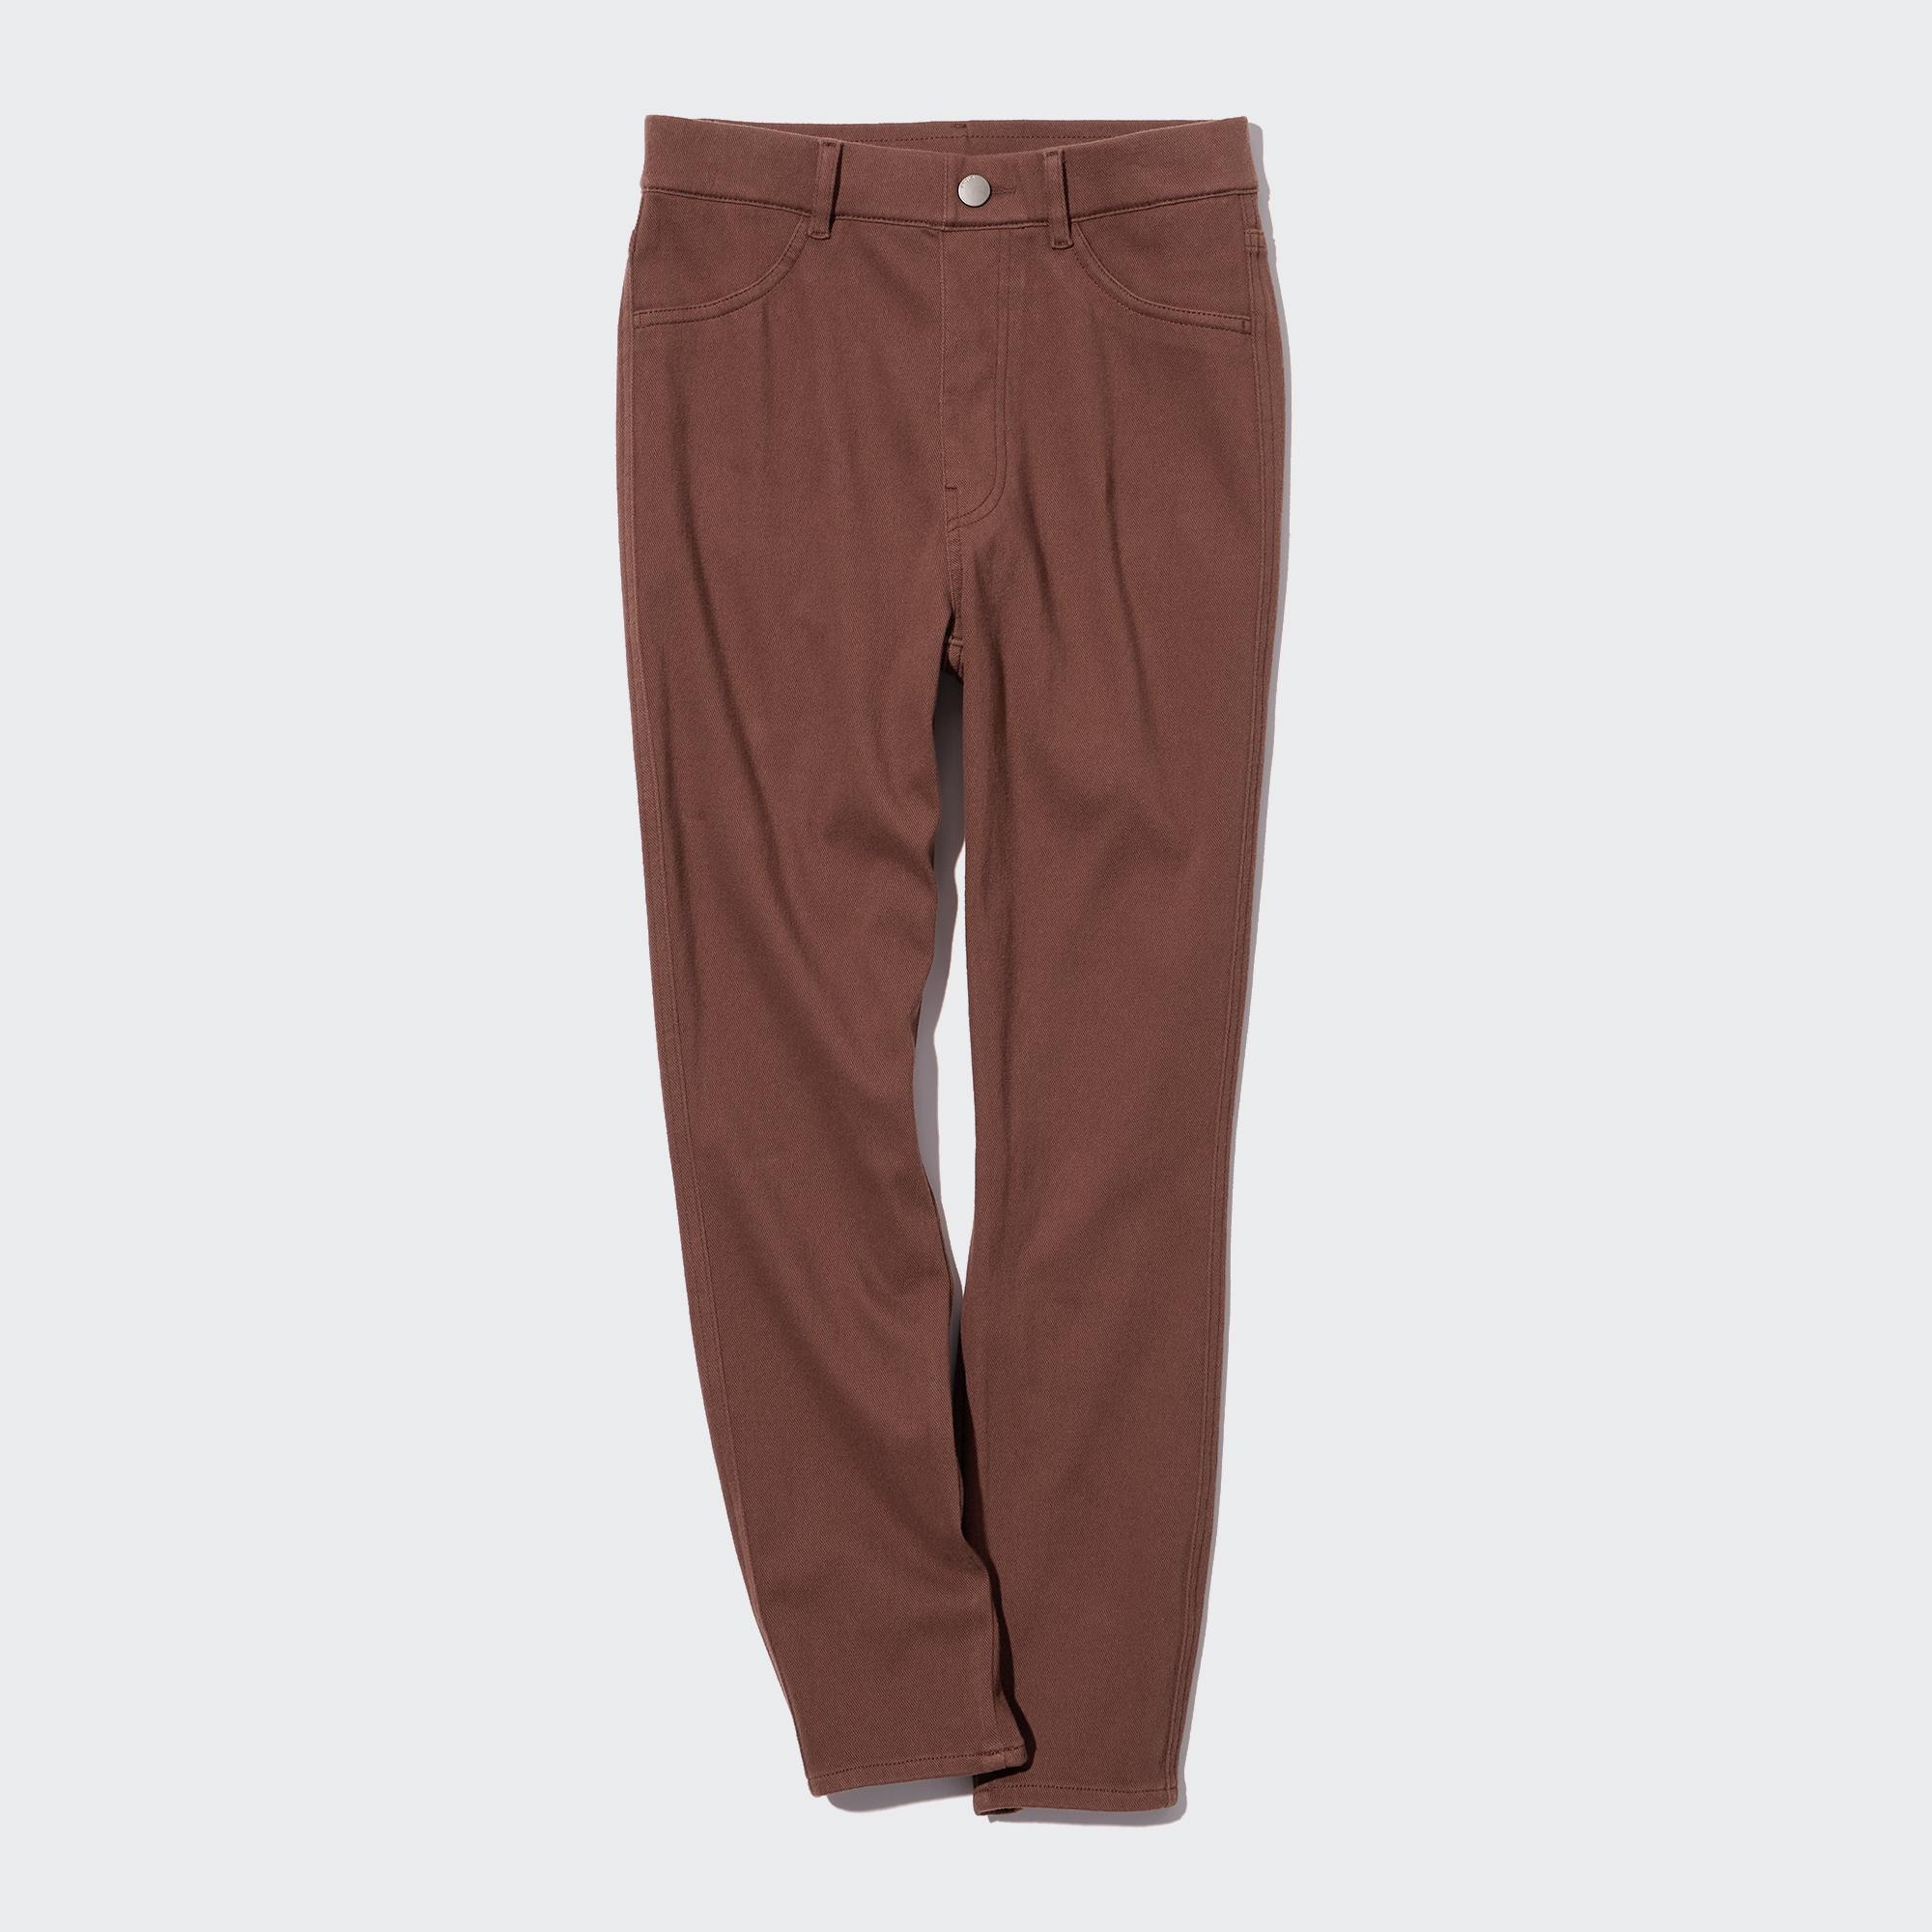 Smart Ankle Pants (Ultra Stretch), UNIQLO US